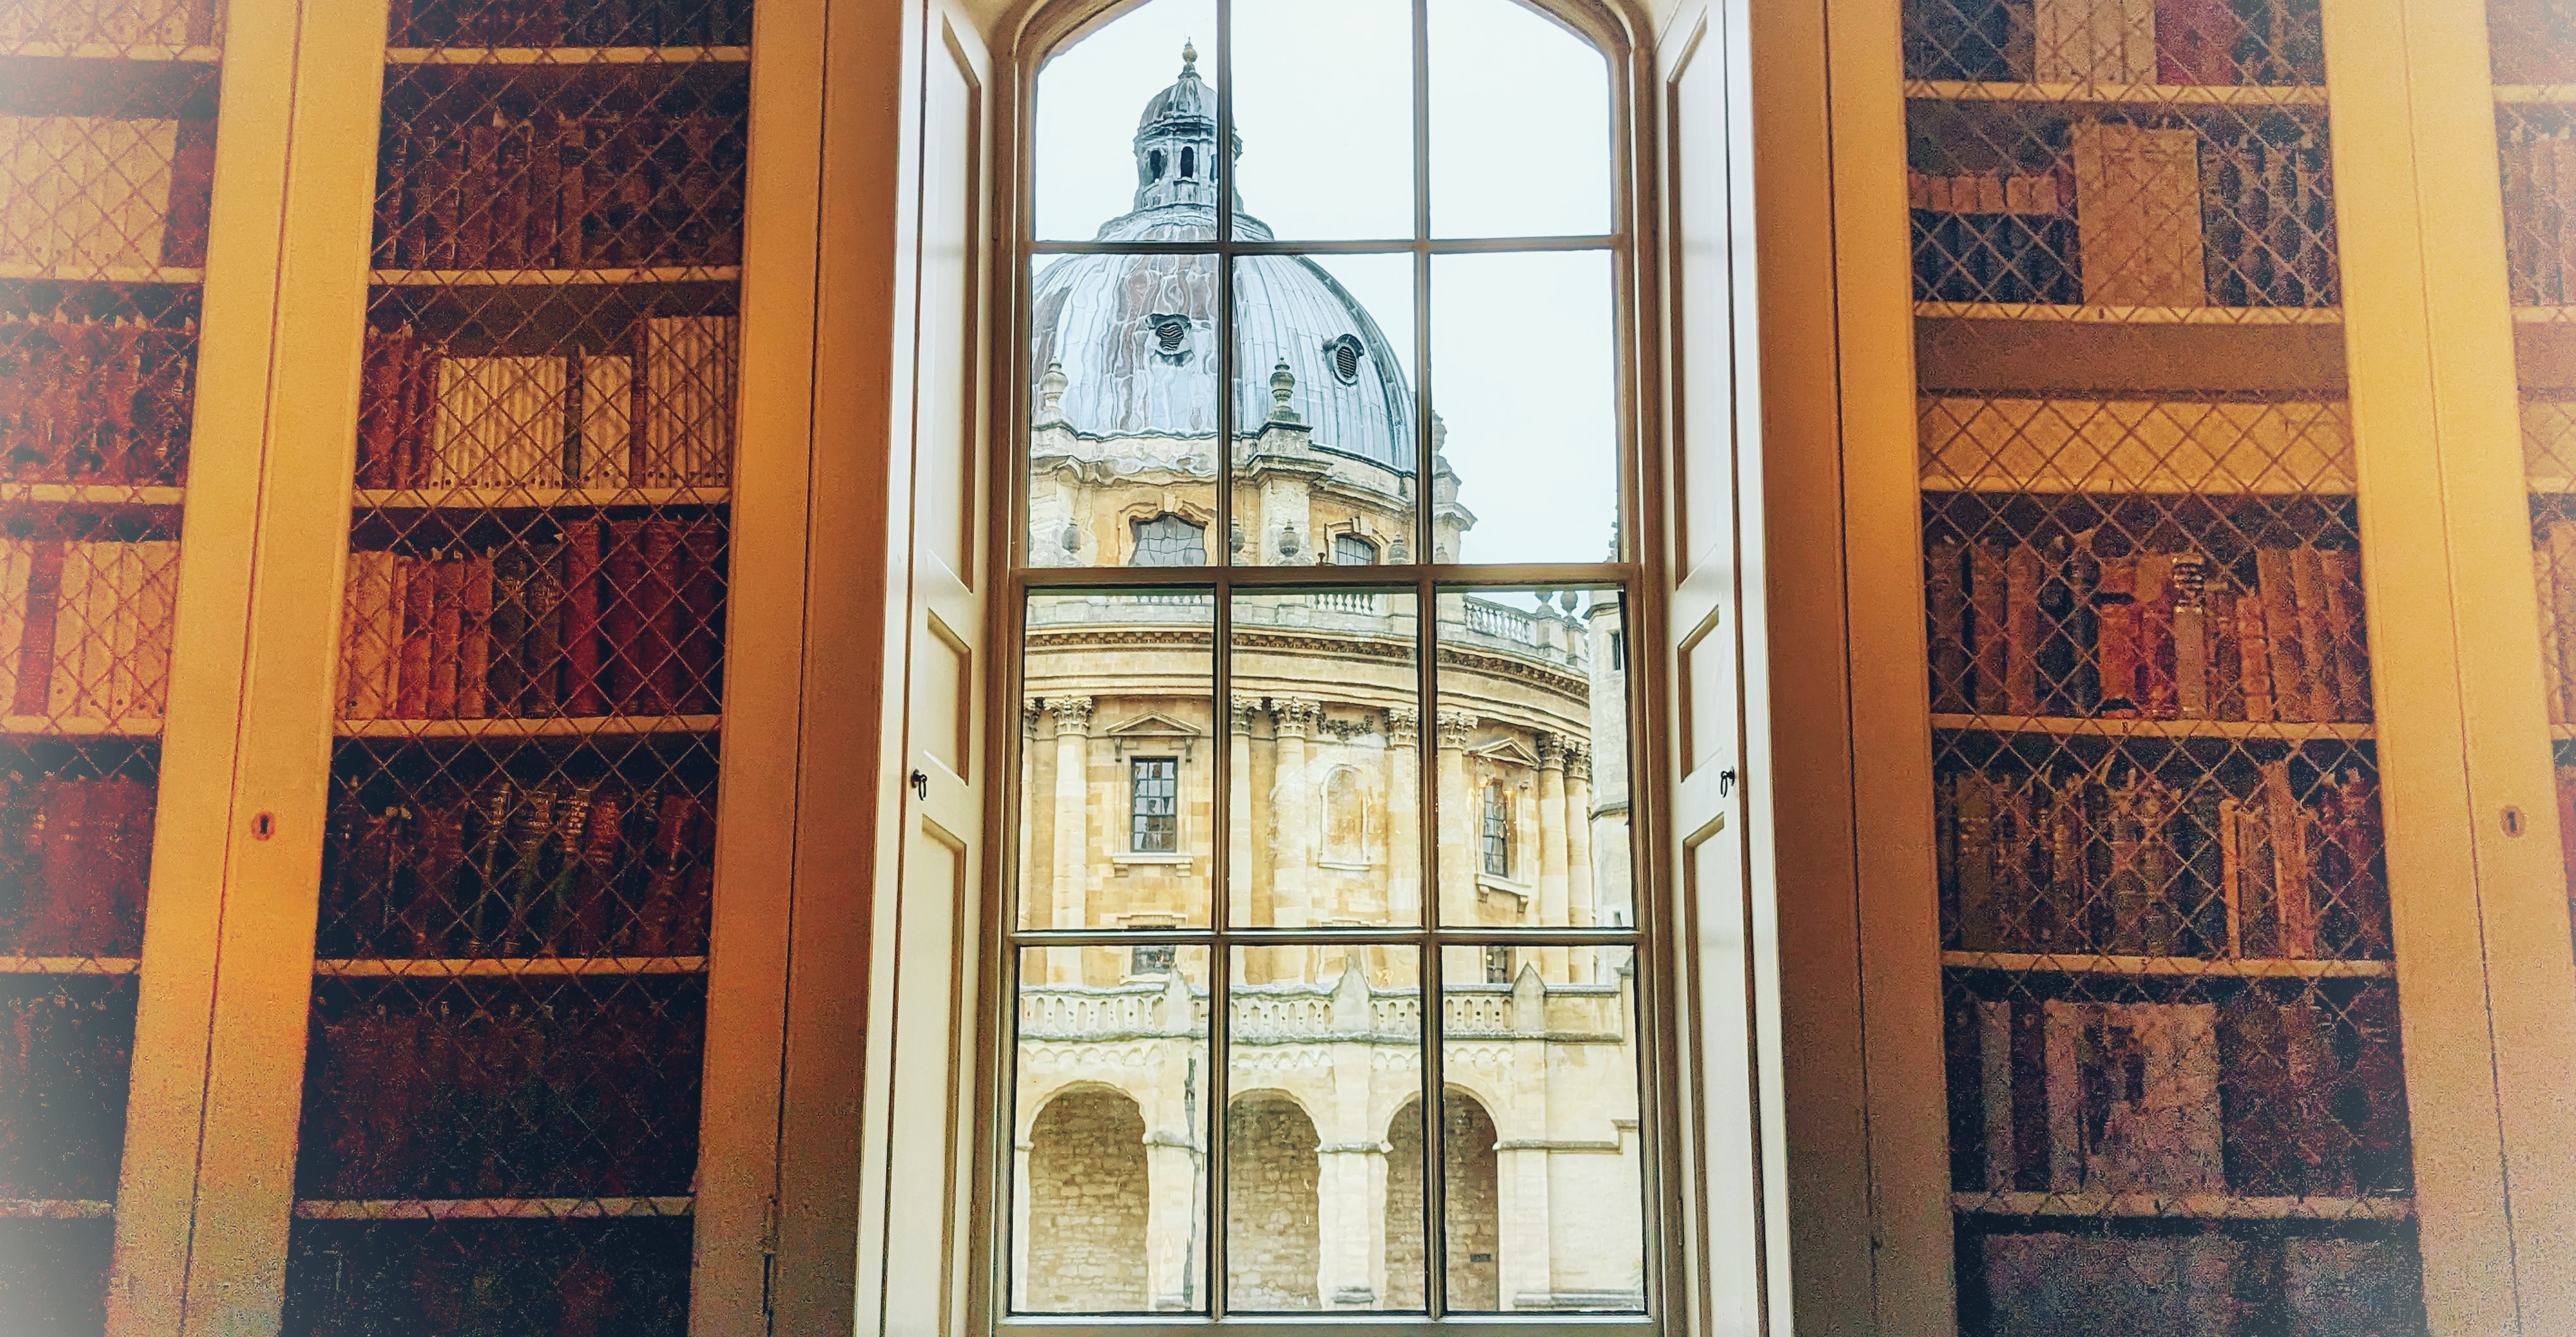 A view of the Radcliffe Camera through a window with bookshelves either side.